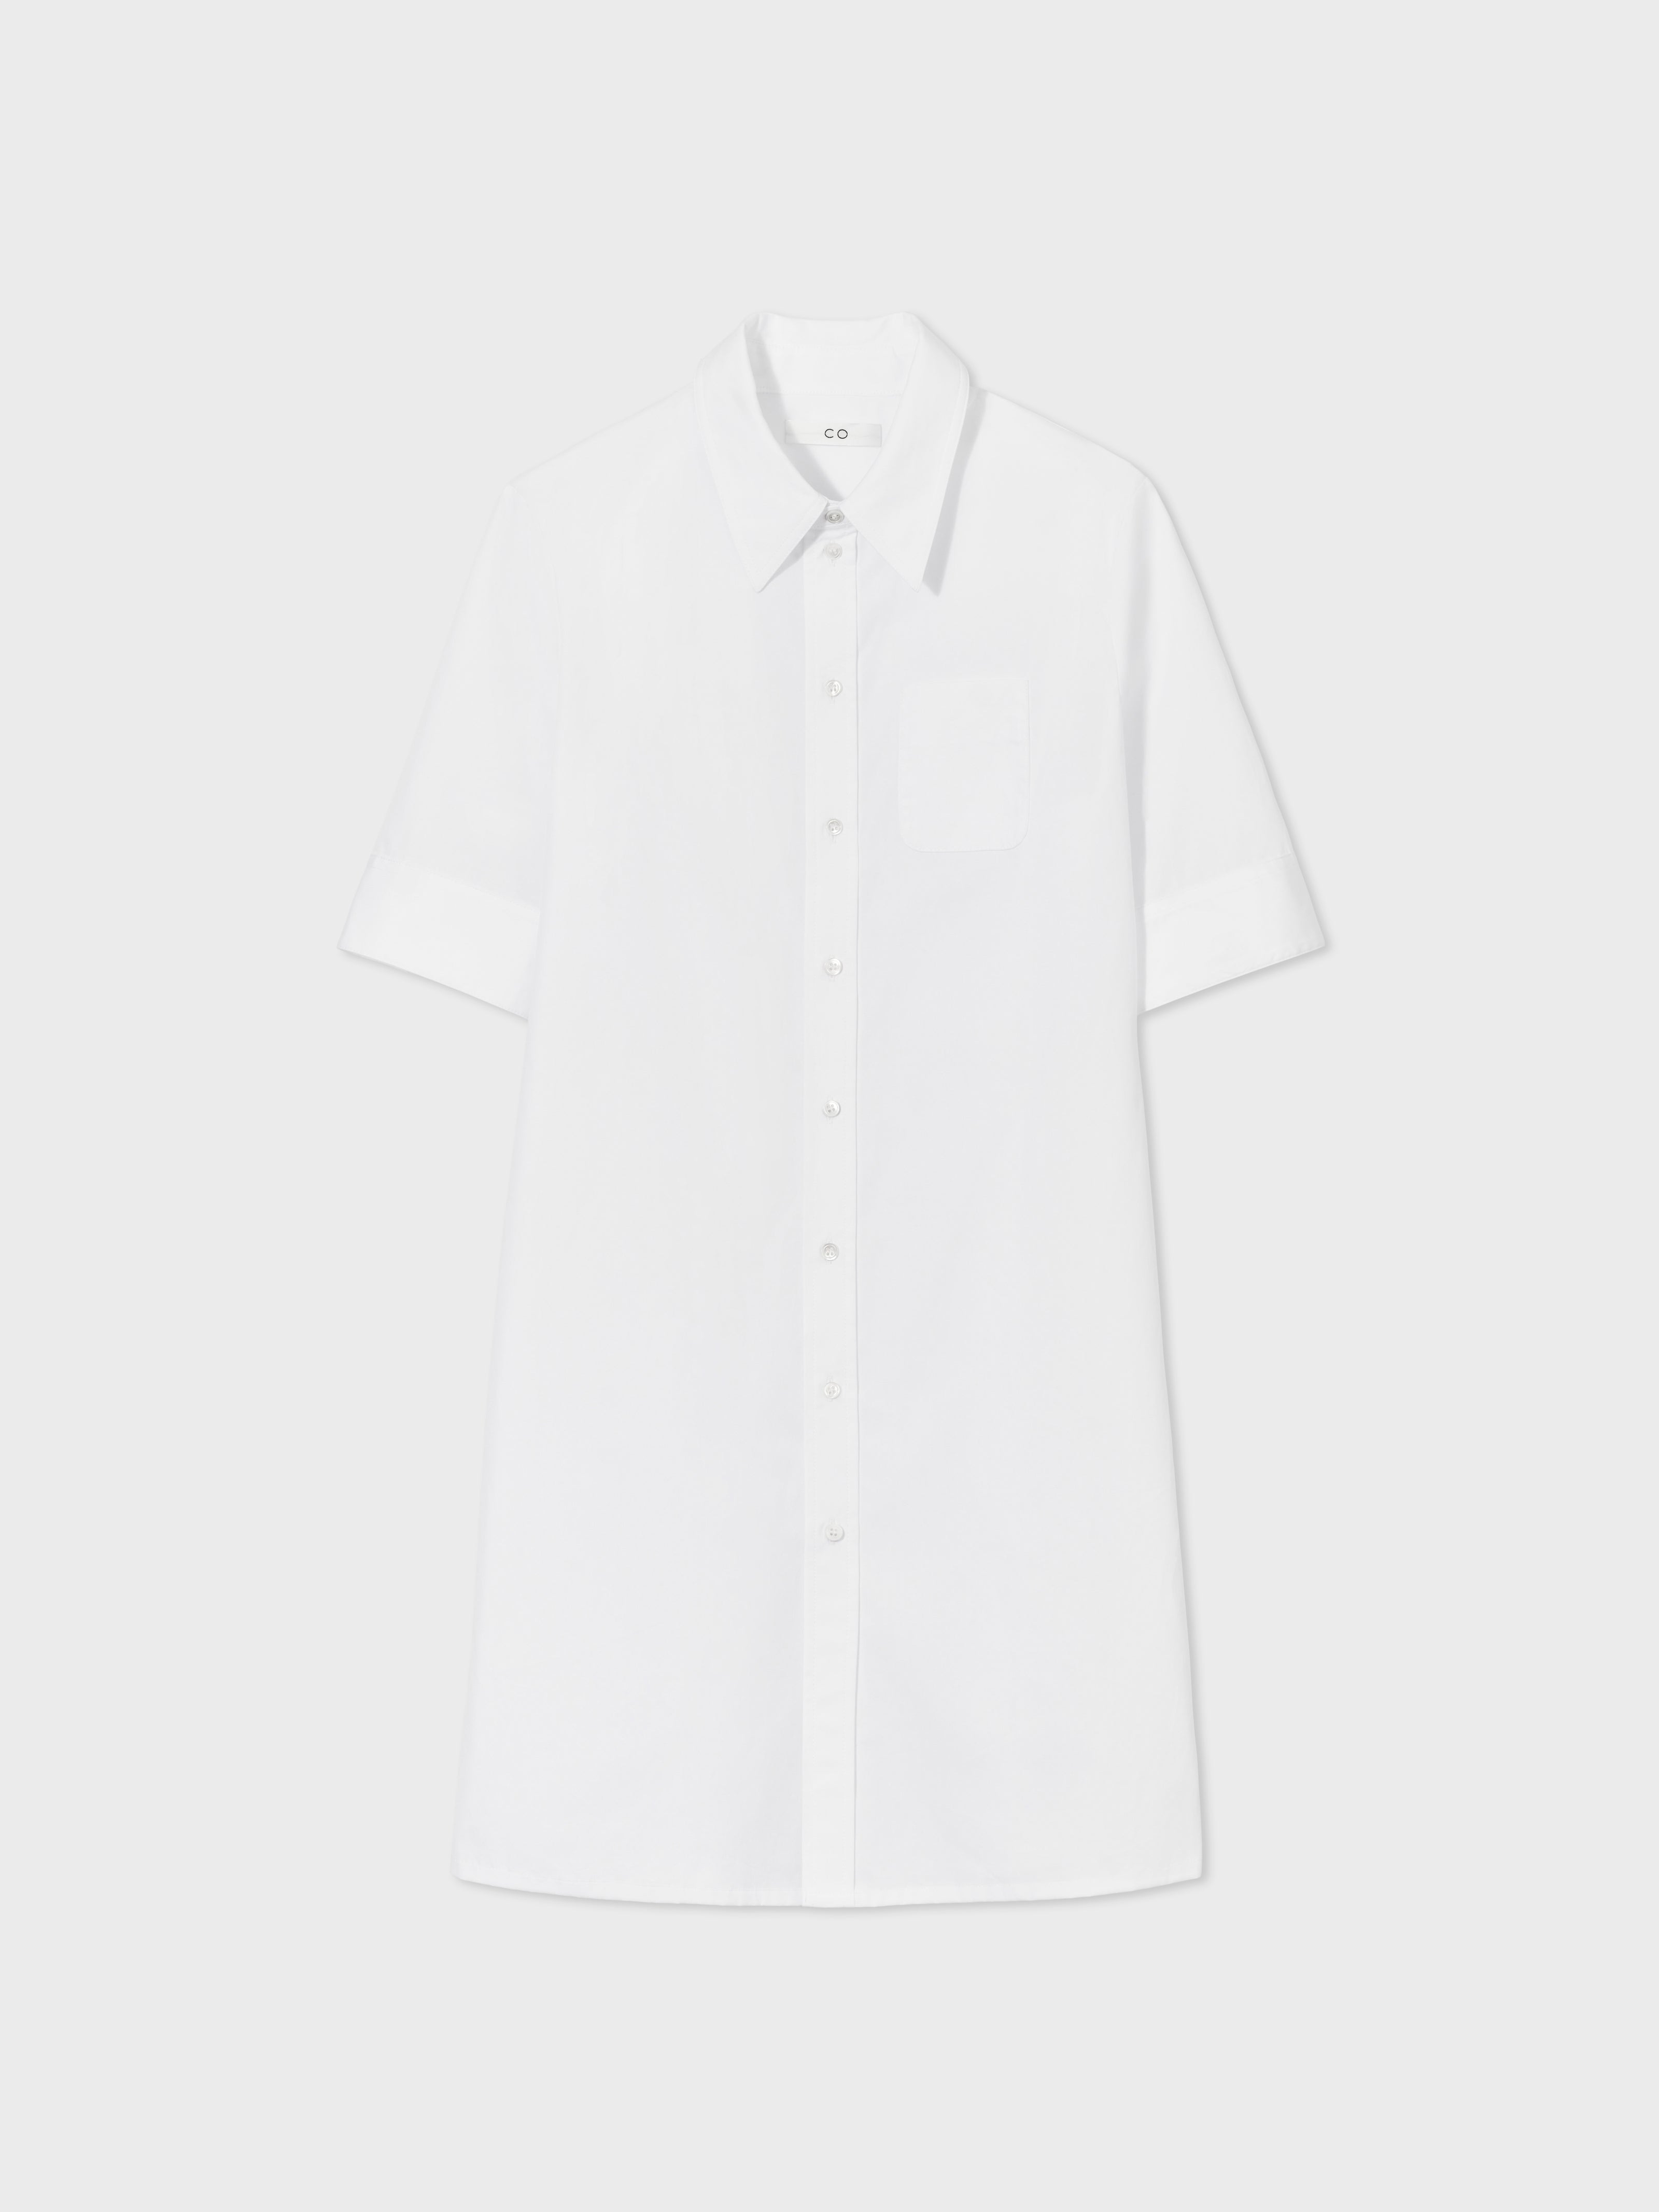 FITTED SHIRTDRESS IN COTTON POPLIN